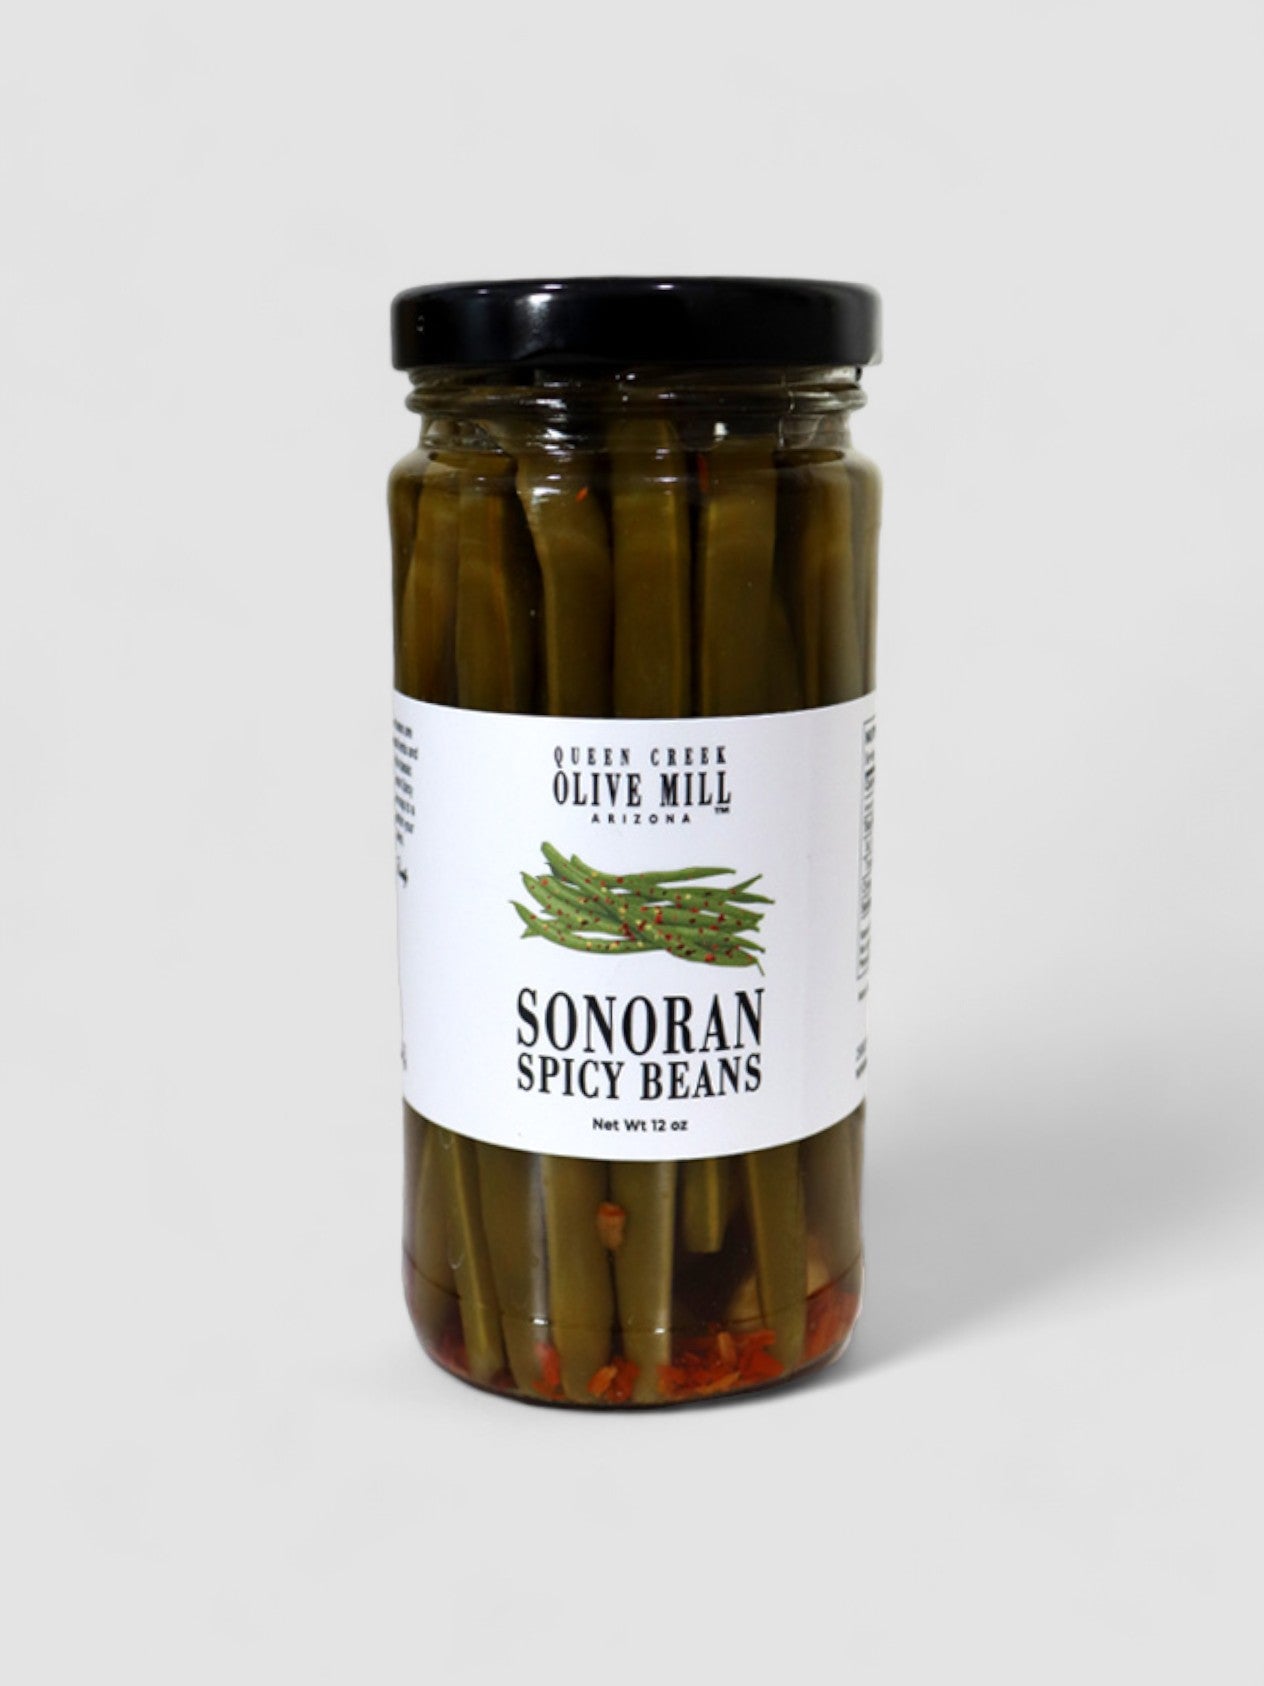 SONORAN SPICY BEANS